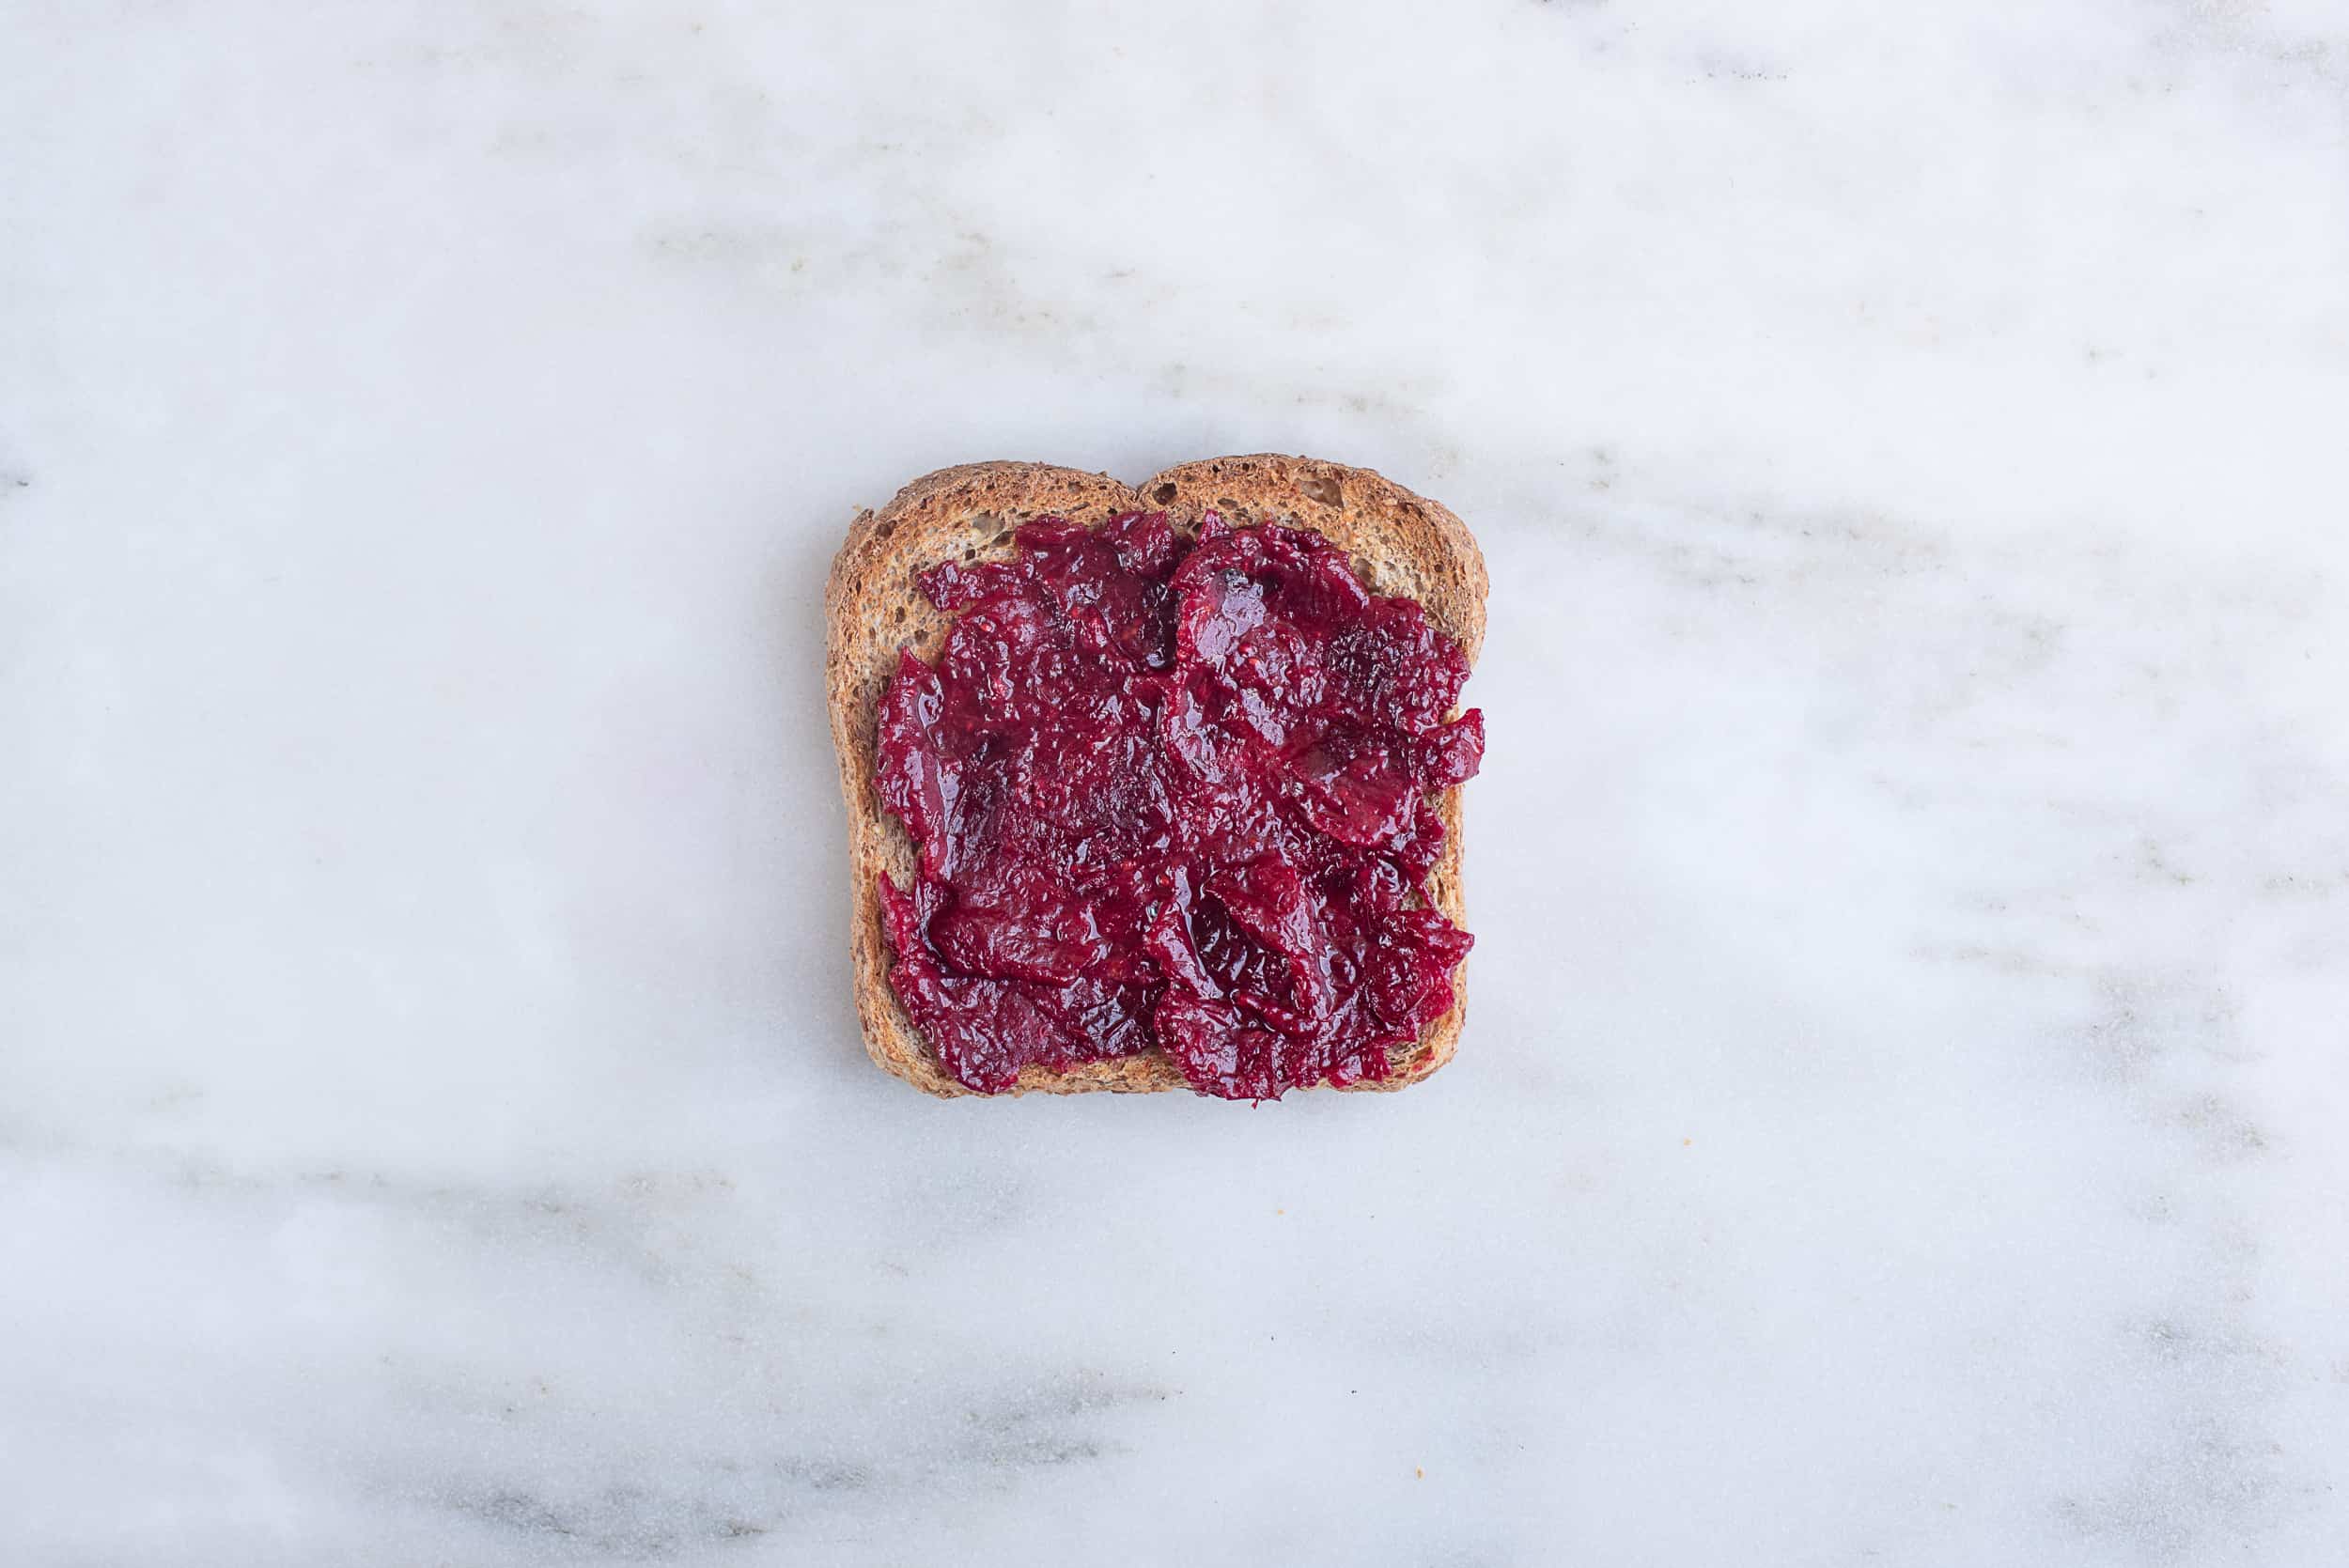 piece of toast topped with cranberry sauce, sitting on a countertop